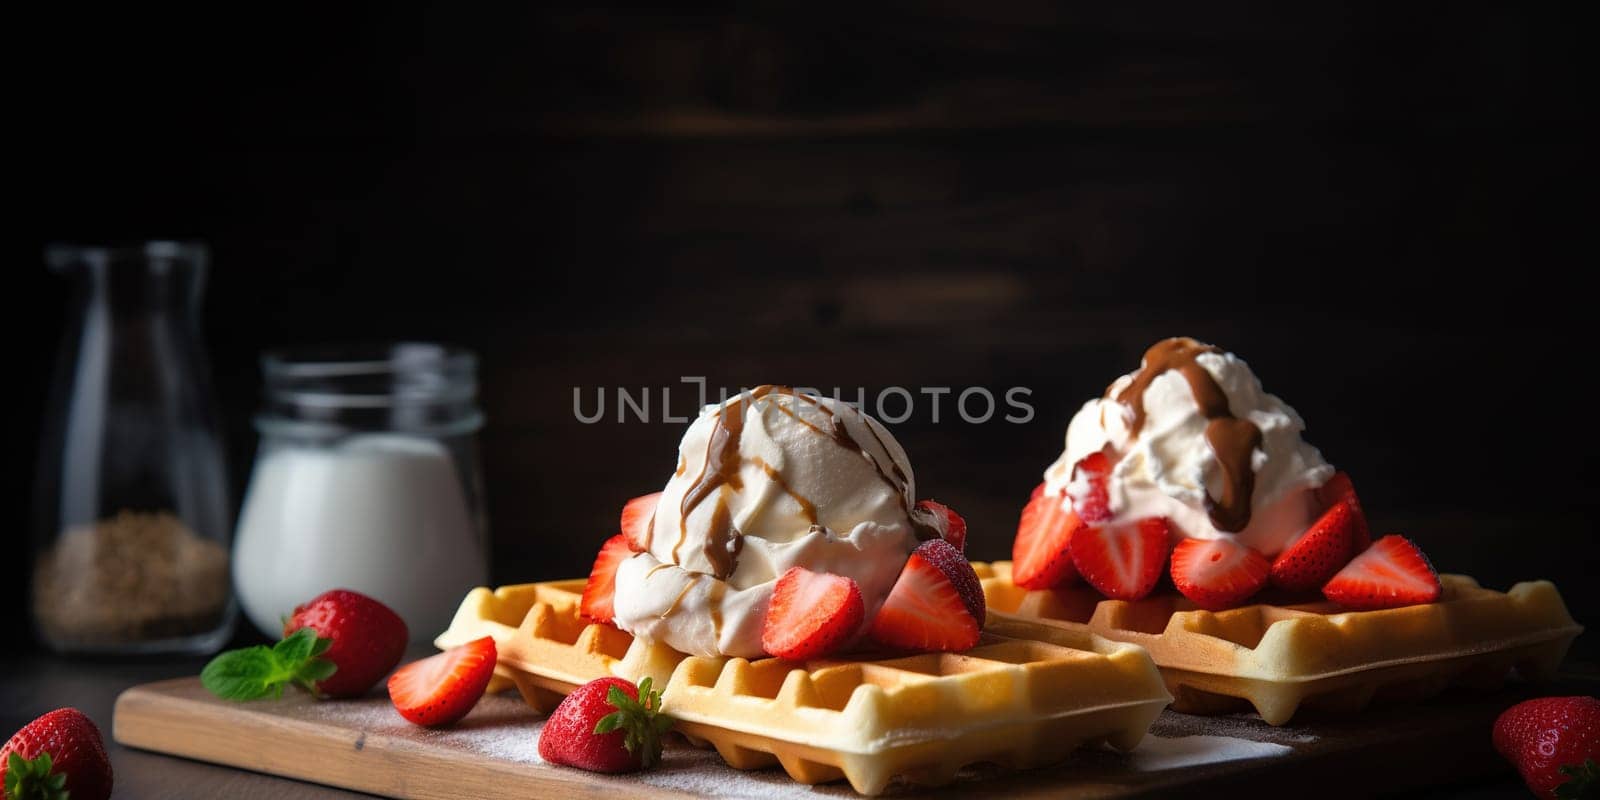 Delicious Waffle Dessert With Strawberries And Cream On A Plate by tan4ikk1